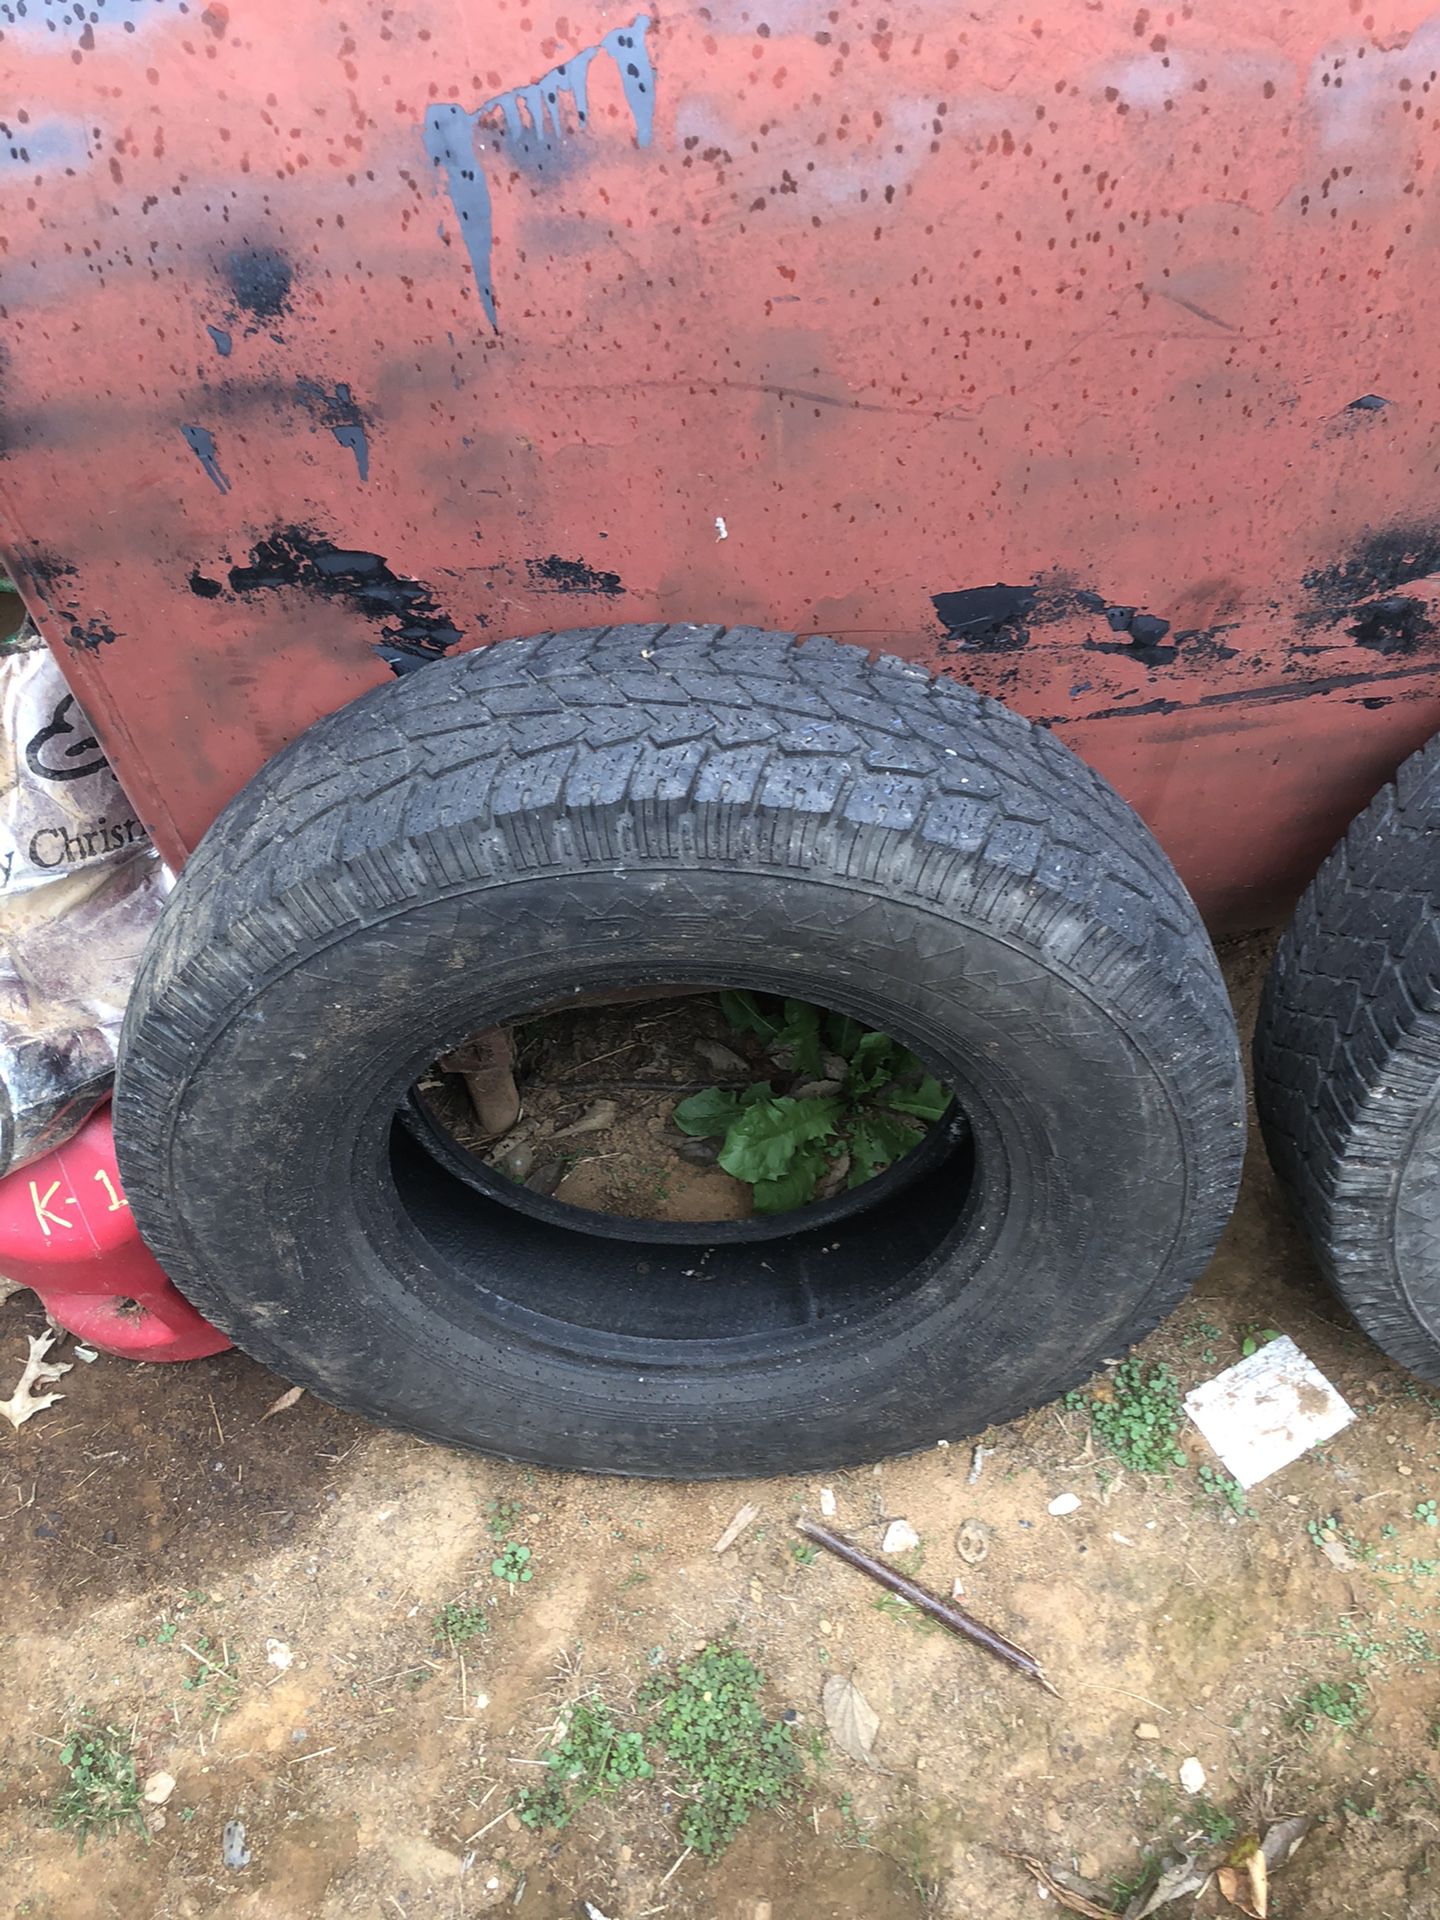 16” tires good for price. 15$ per tire